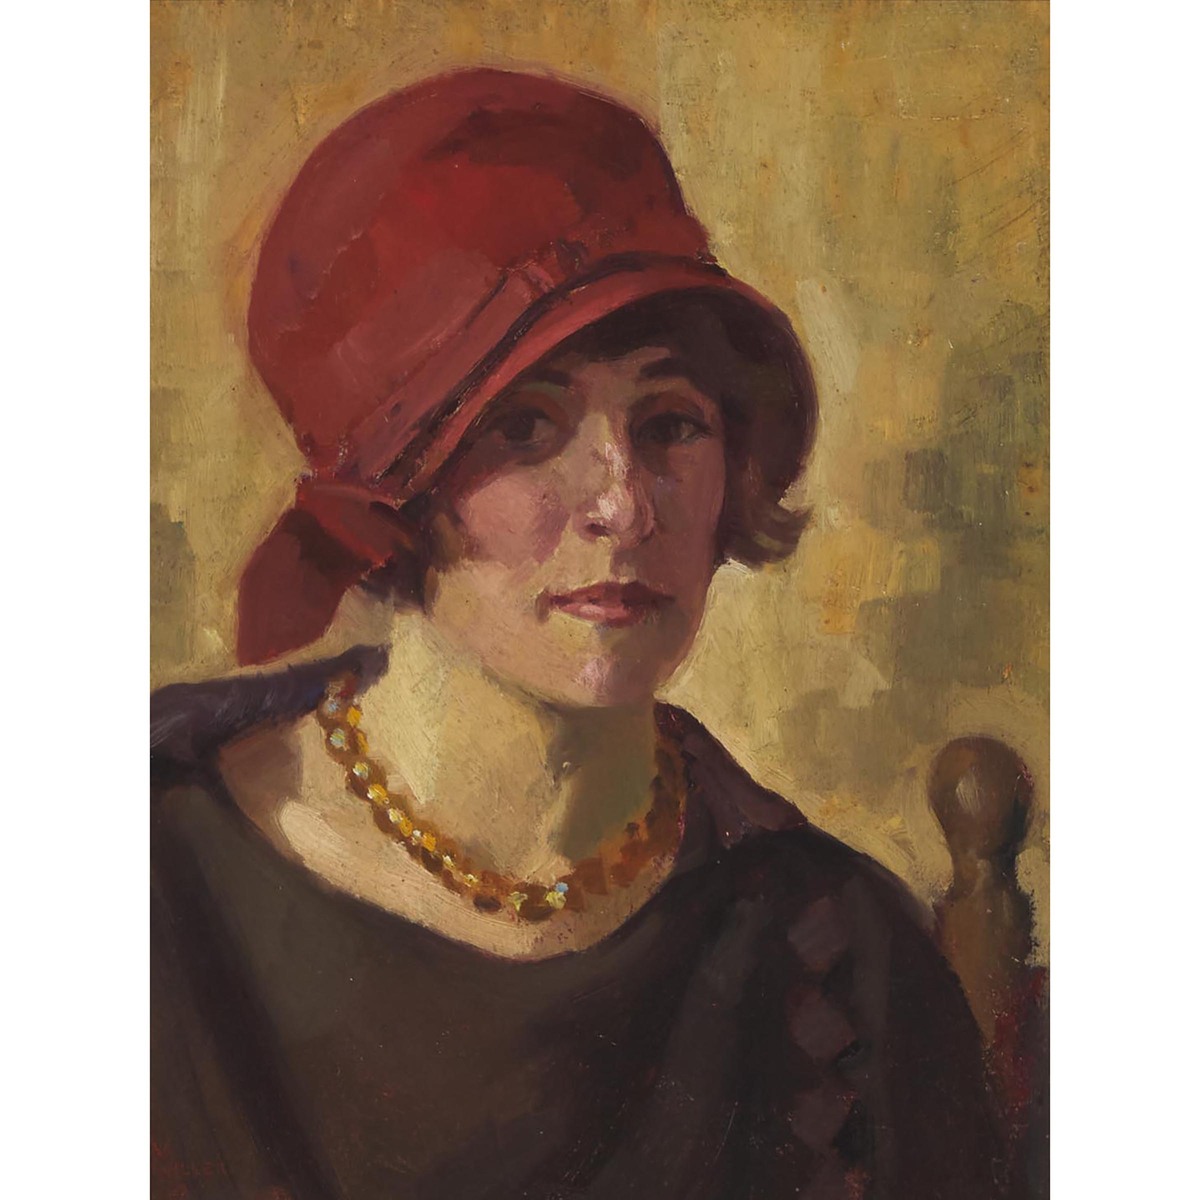 Richard E. Miller (1875-1943), UNTITLED (PORTRAIT OF A WOMAN IN A RED HAT) CA. 1920, signed lower le